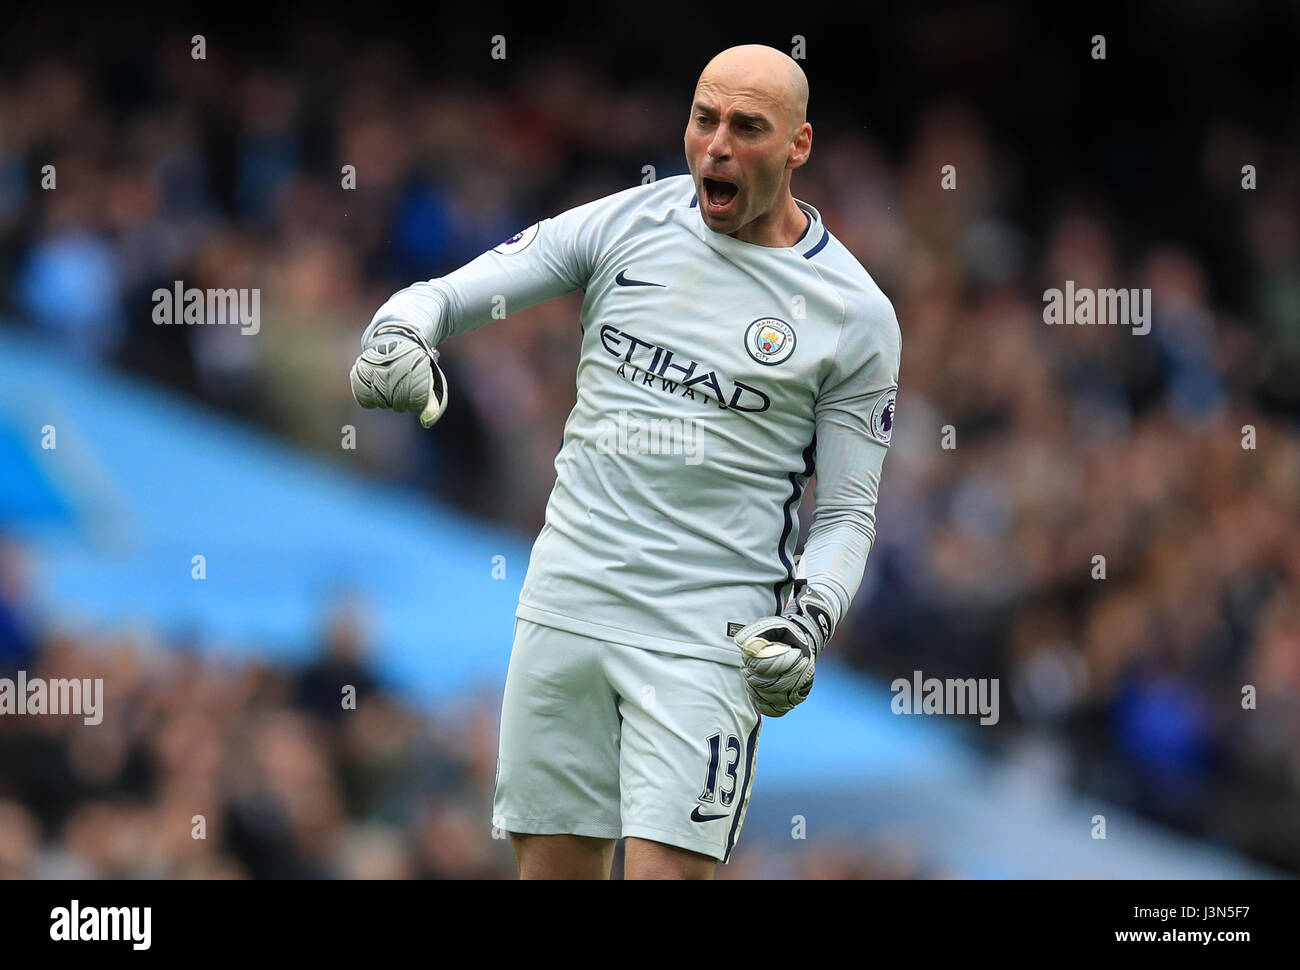 Manchester City goalkeeper Willy Caballero celebrates his side's third goal of the game scored by Kevin De Bruyne during the Premier League match at the Etihad Stadium, Manchester. Stock Photo